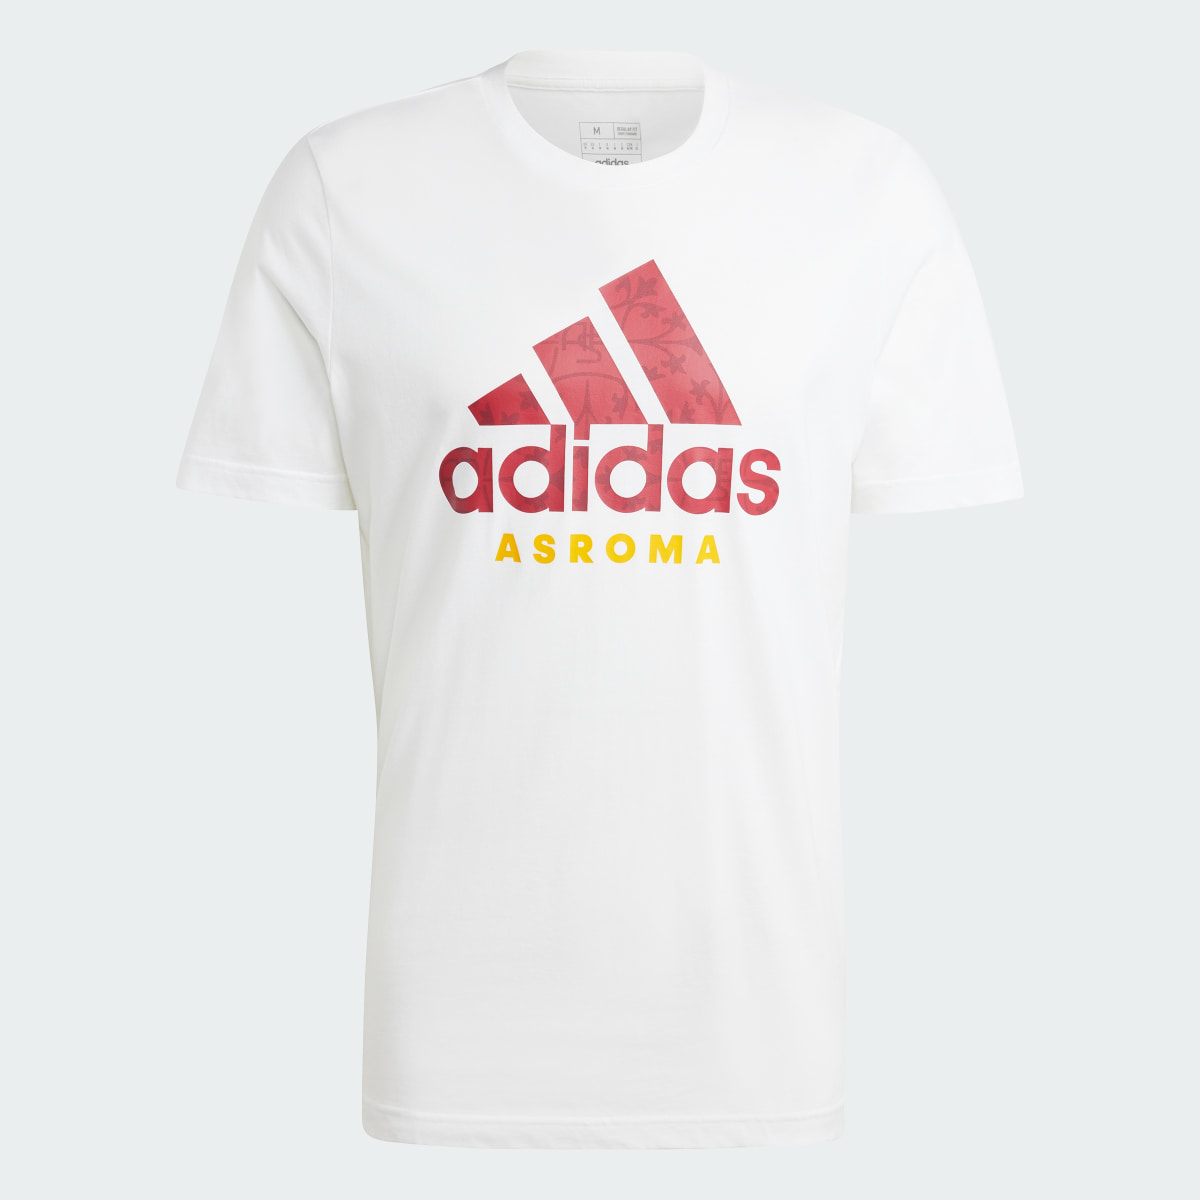 Adidas AS Roma DNA Graphic T-Shirt. 5